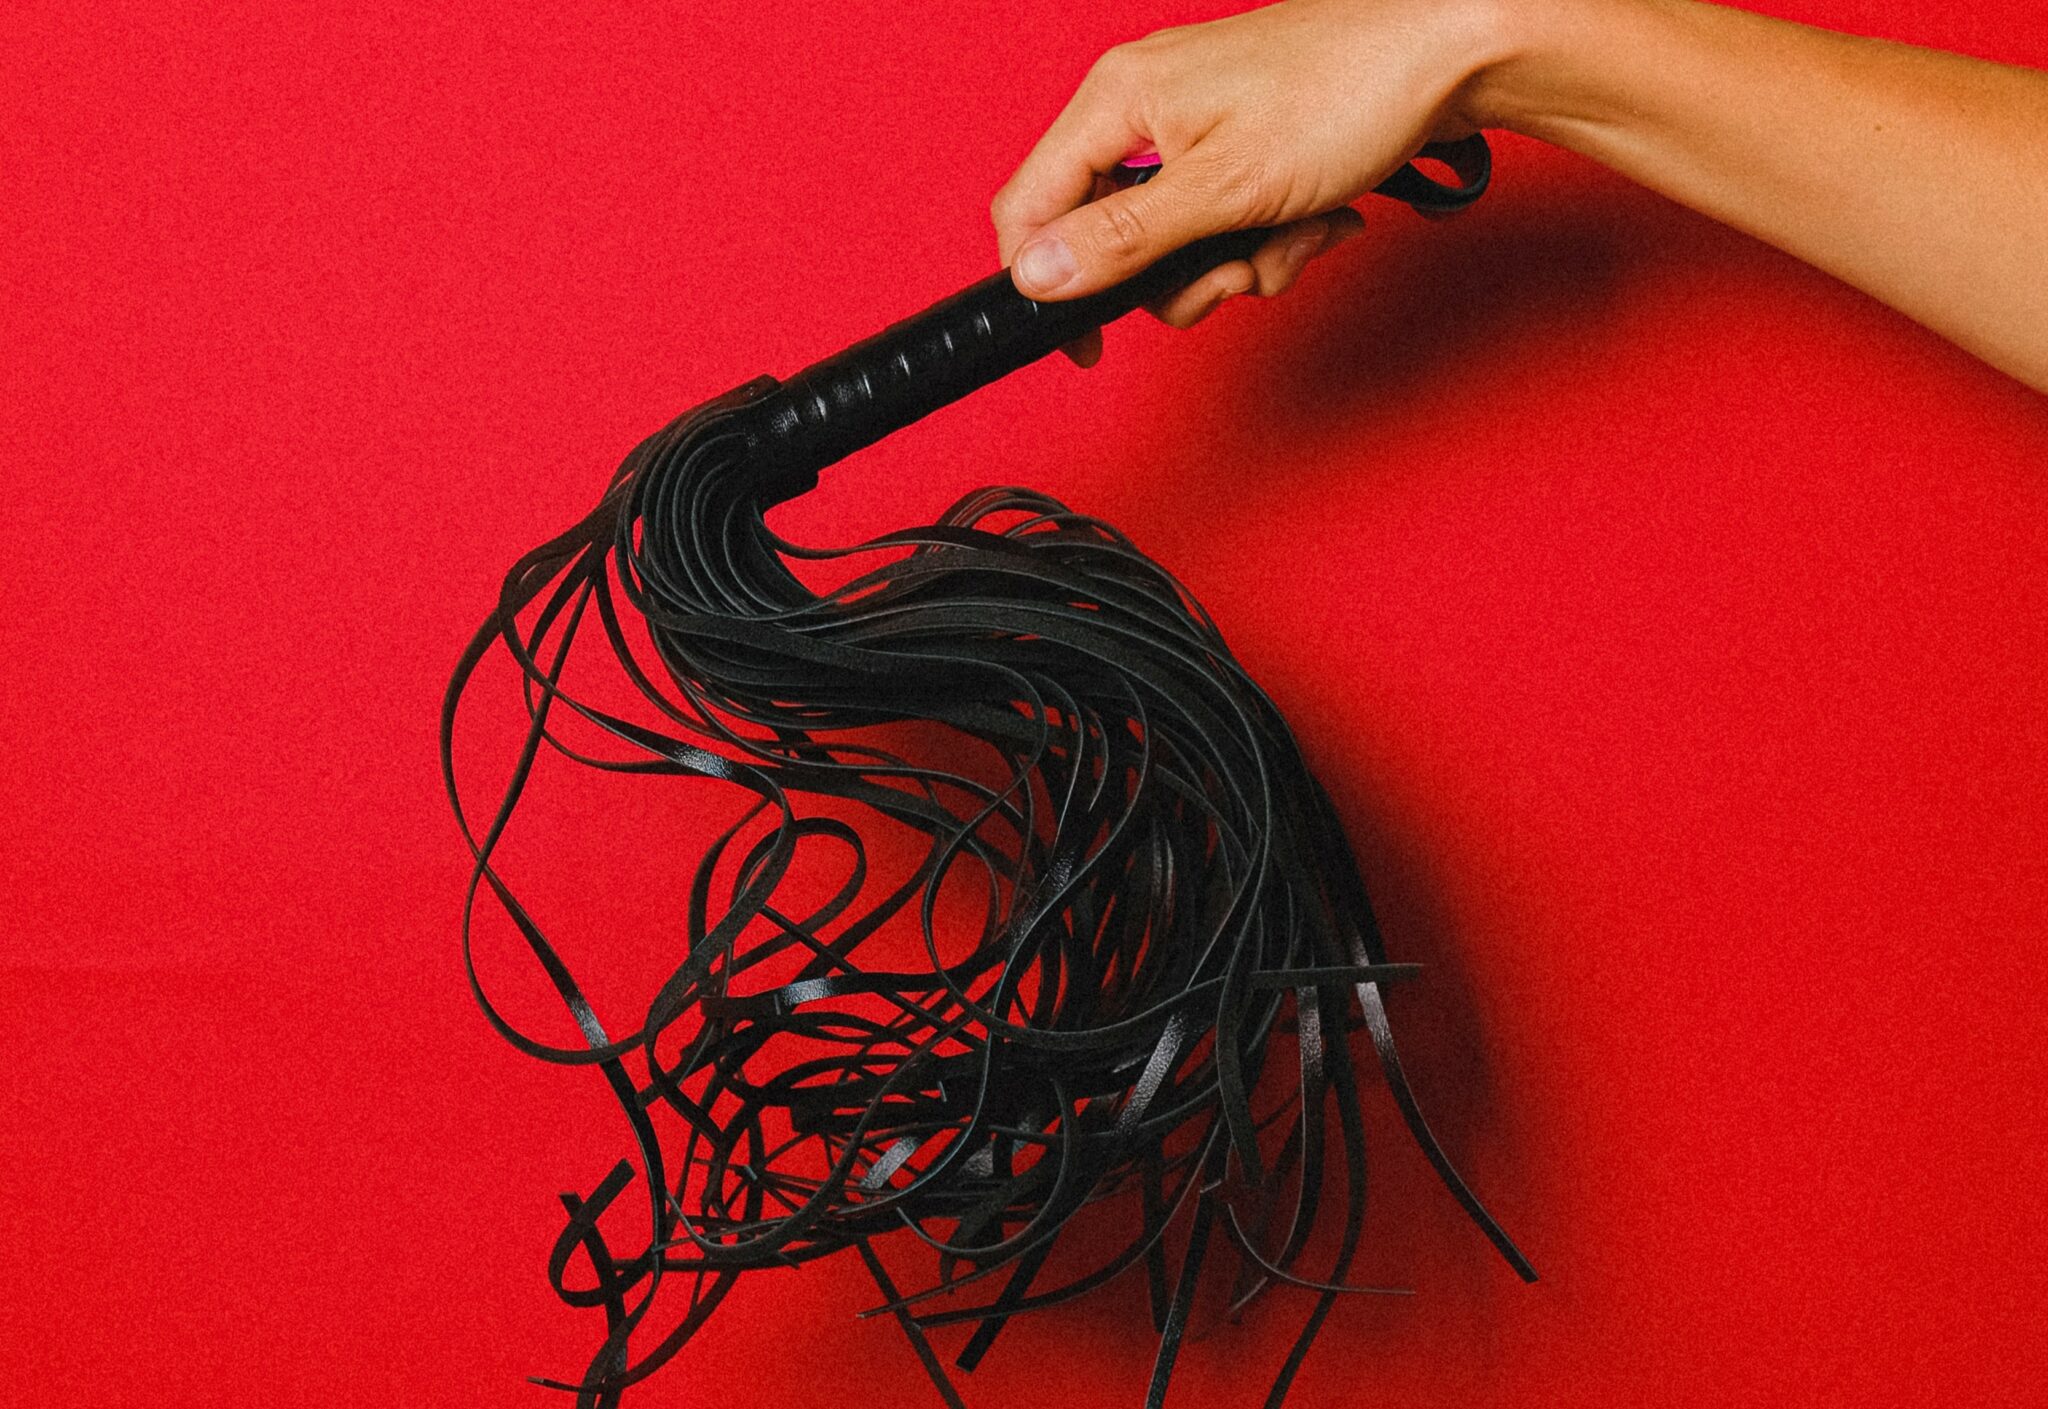 A black bdsm whip against a red background.